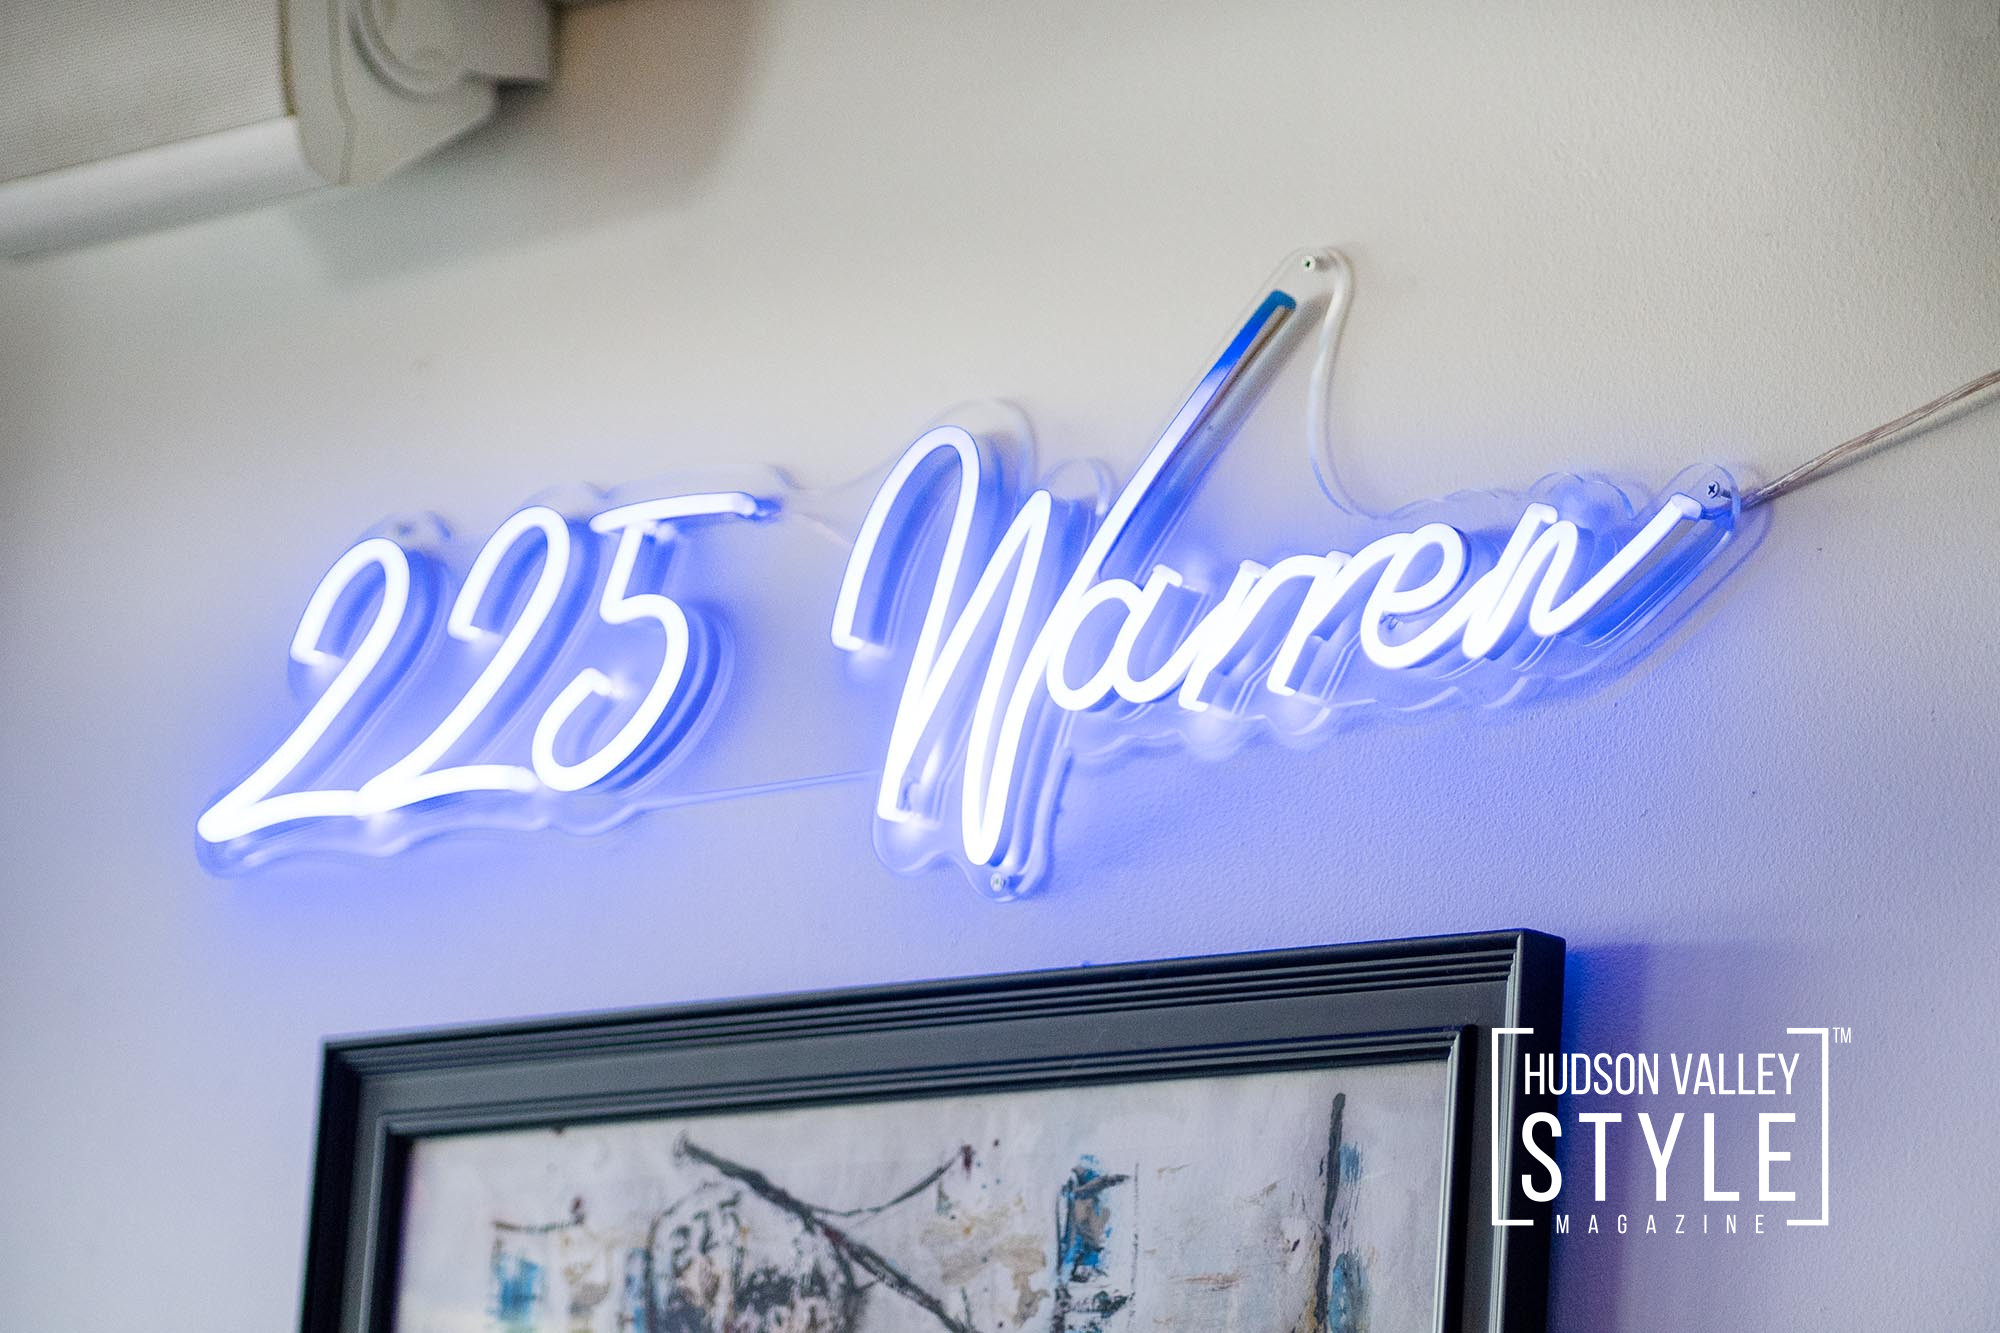 Spring into Flavor at 225 Warren: A Hudson, NY Photo Gallery + Restaurant Review by Photographer Maxwell Alexander – Presented by Alluvion Vacations